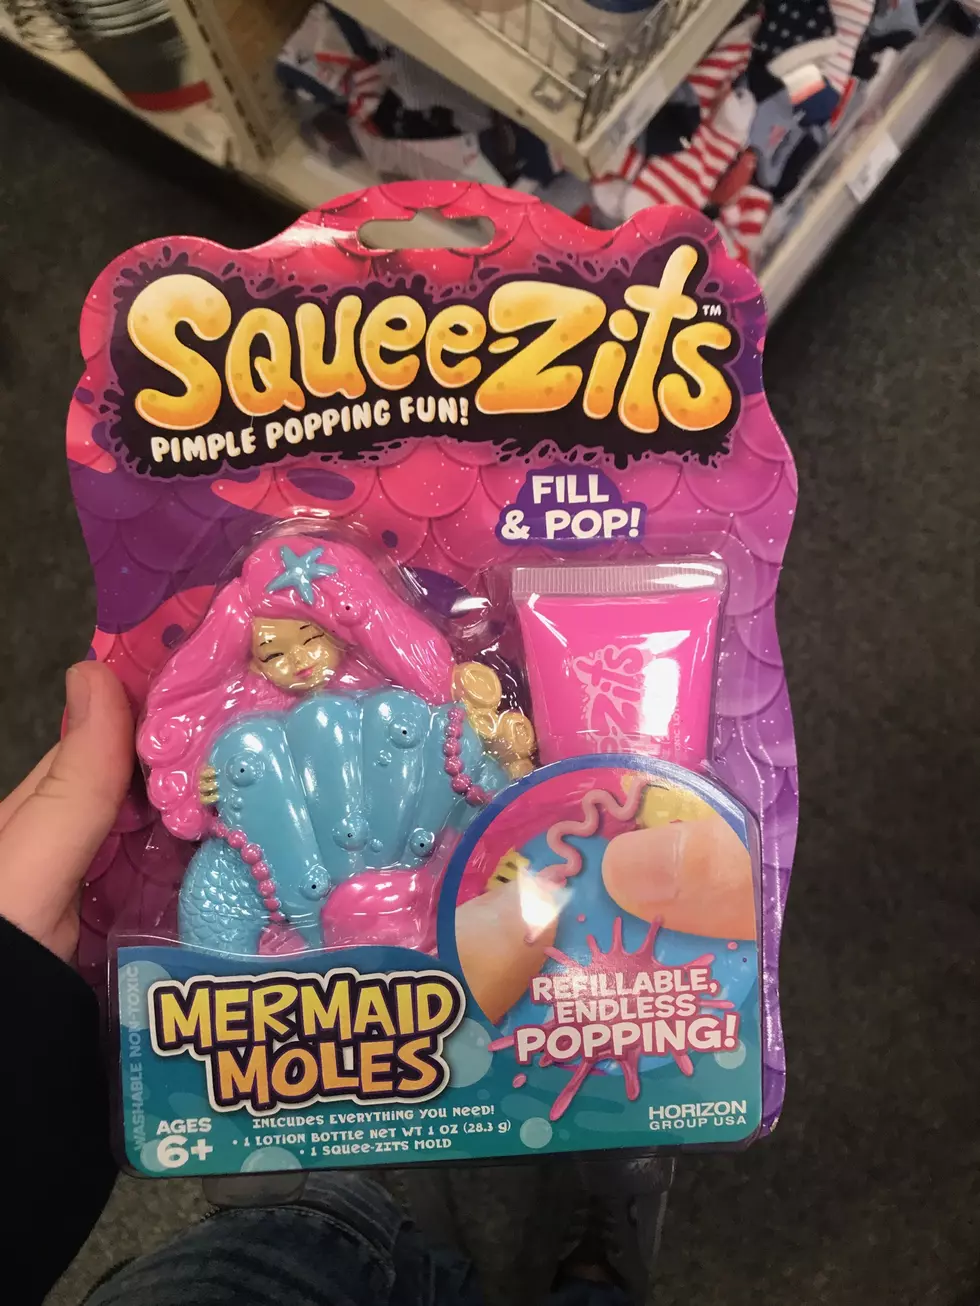 Squeeze-Zits Mermaid Moles Some Summer Pimple Popping Fun!